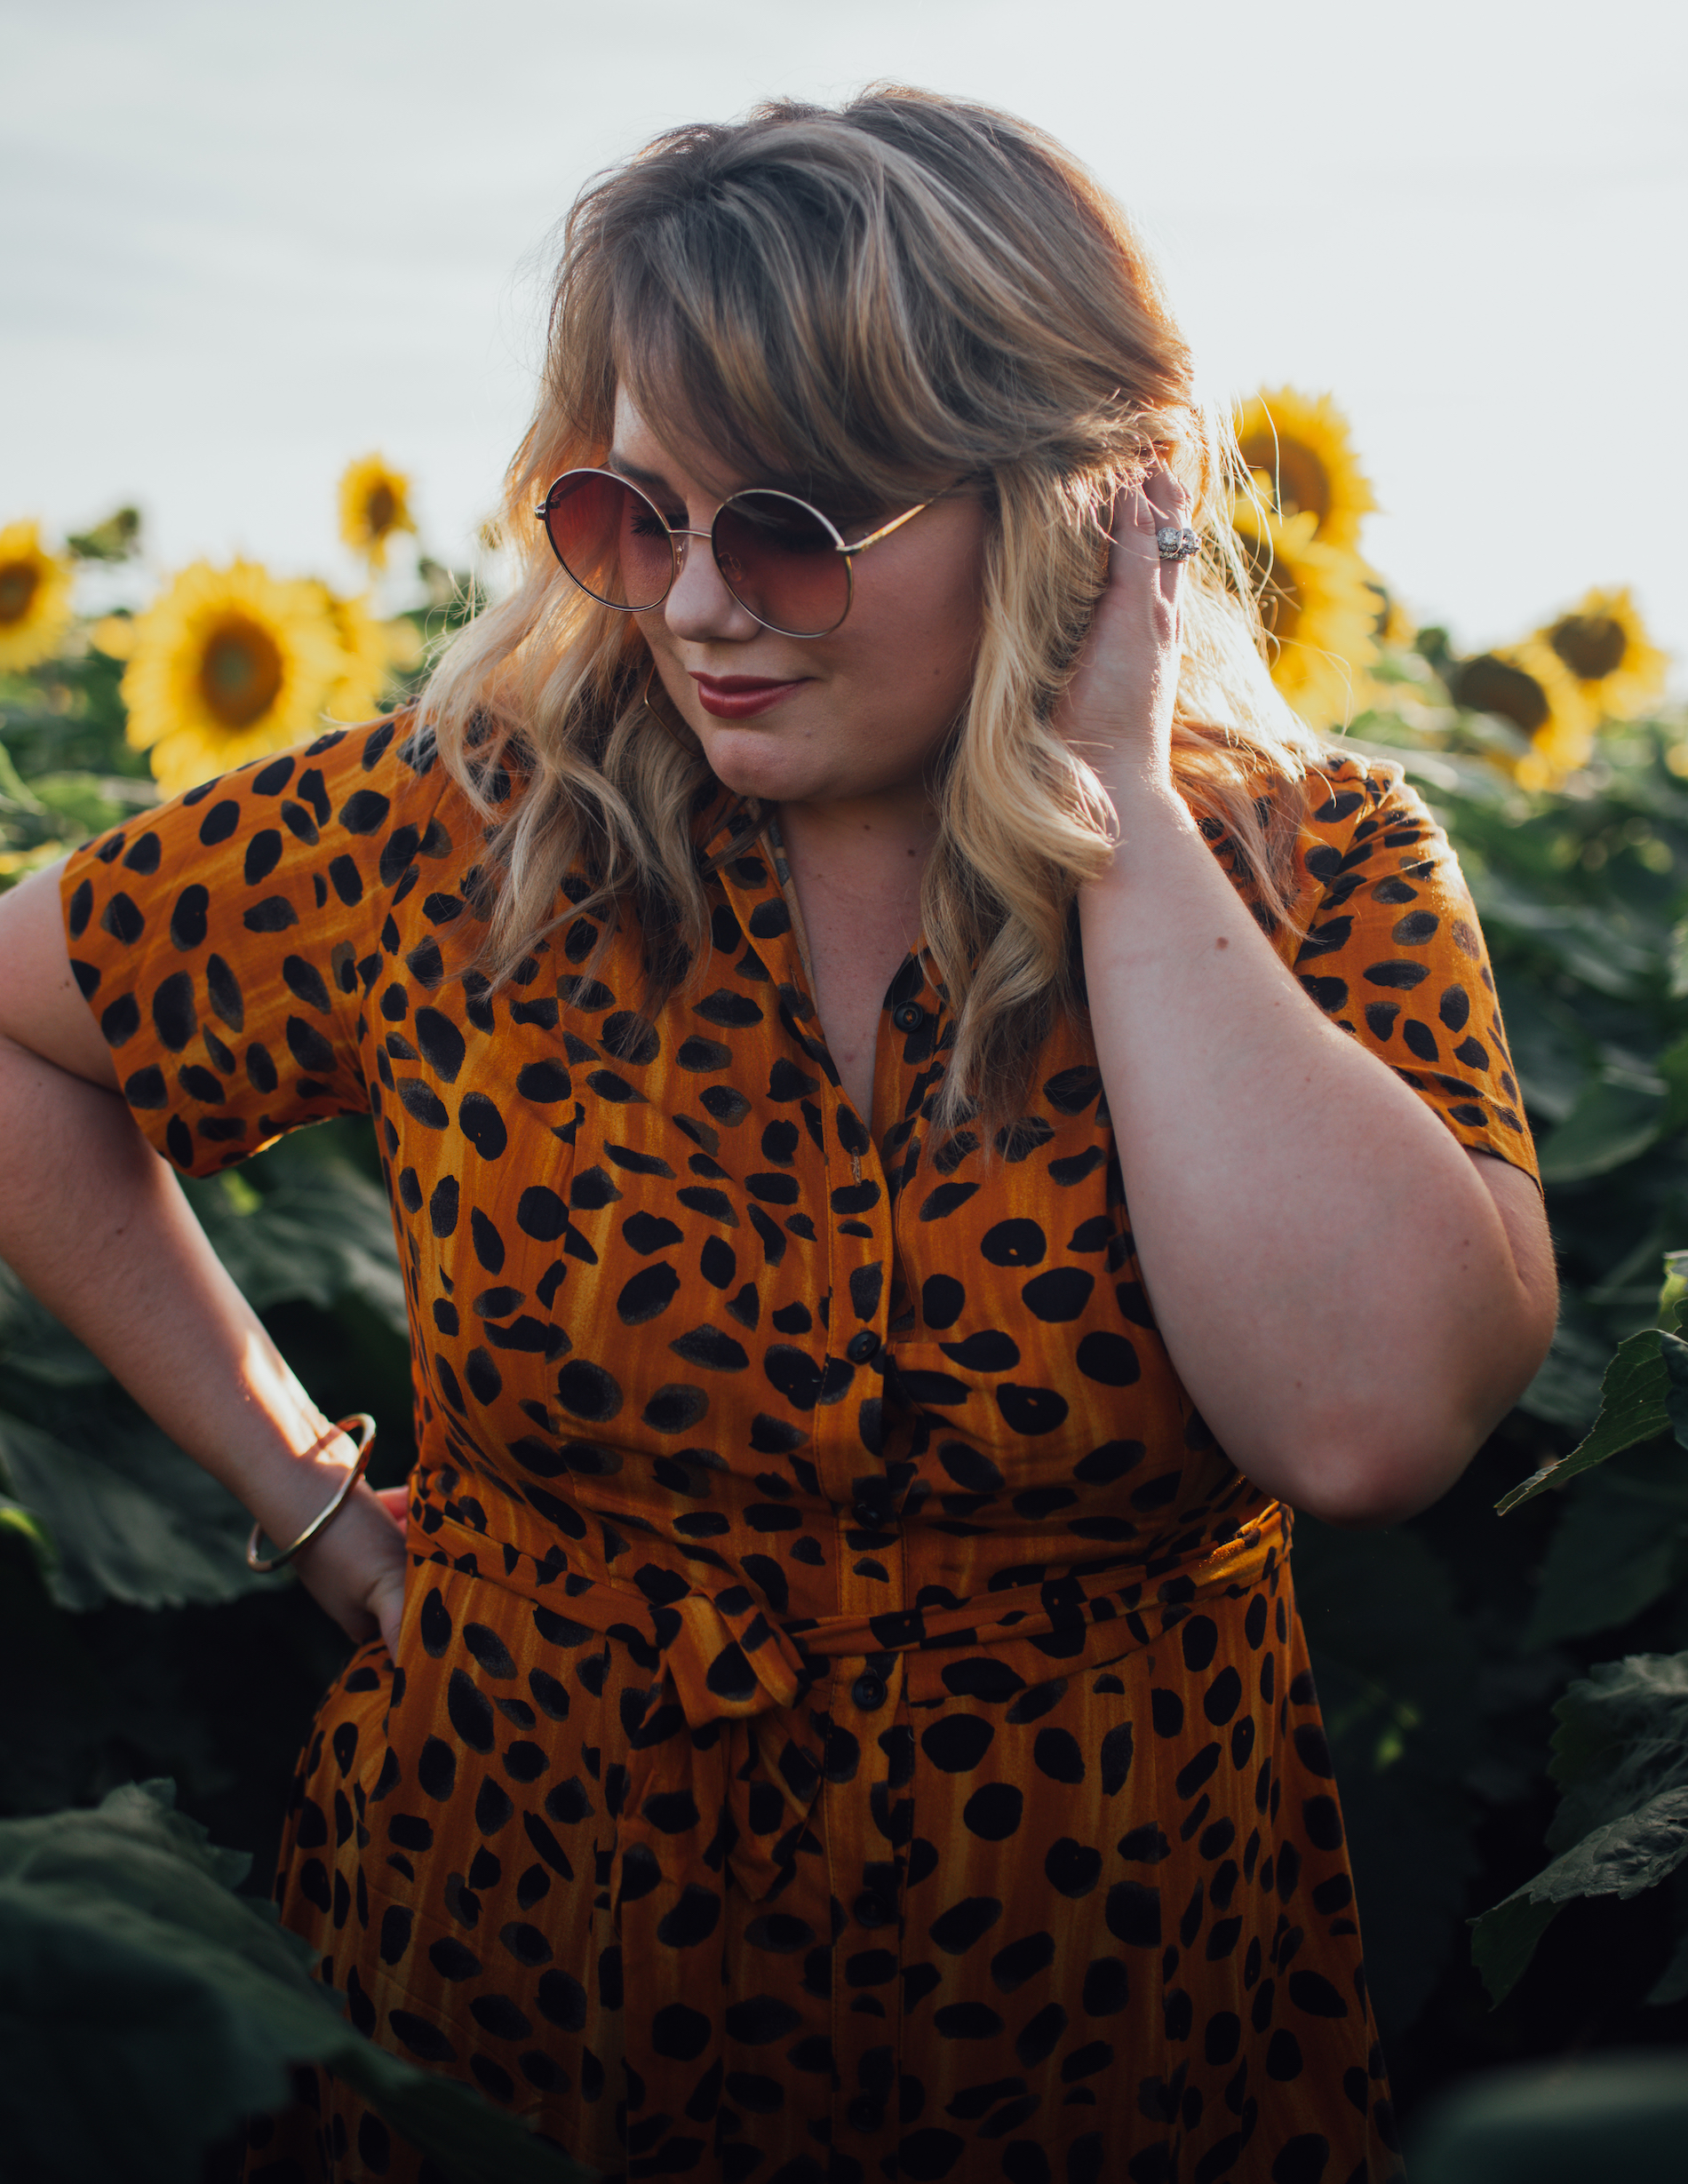 Anthropologie Plus Size . Sharing how I styled this Leopard Maxi Dress from Anrhropologie as an #Anthropartner. Anthropologie has plus sizes! 